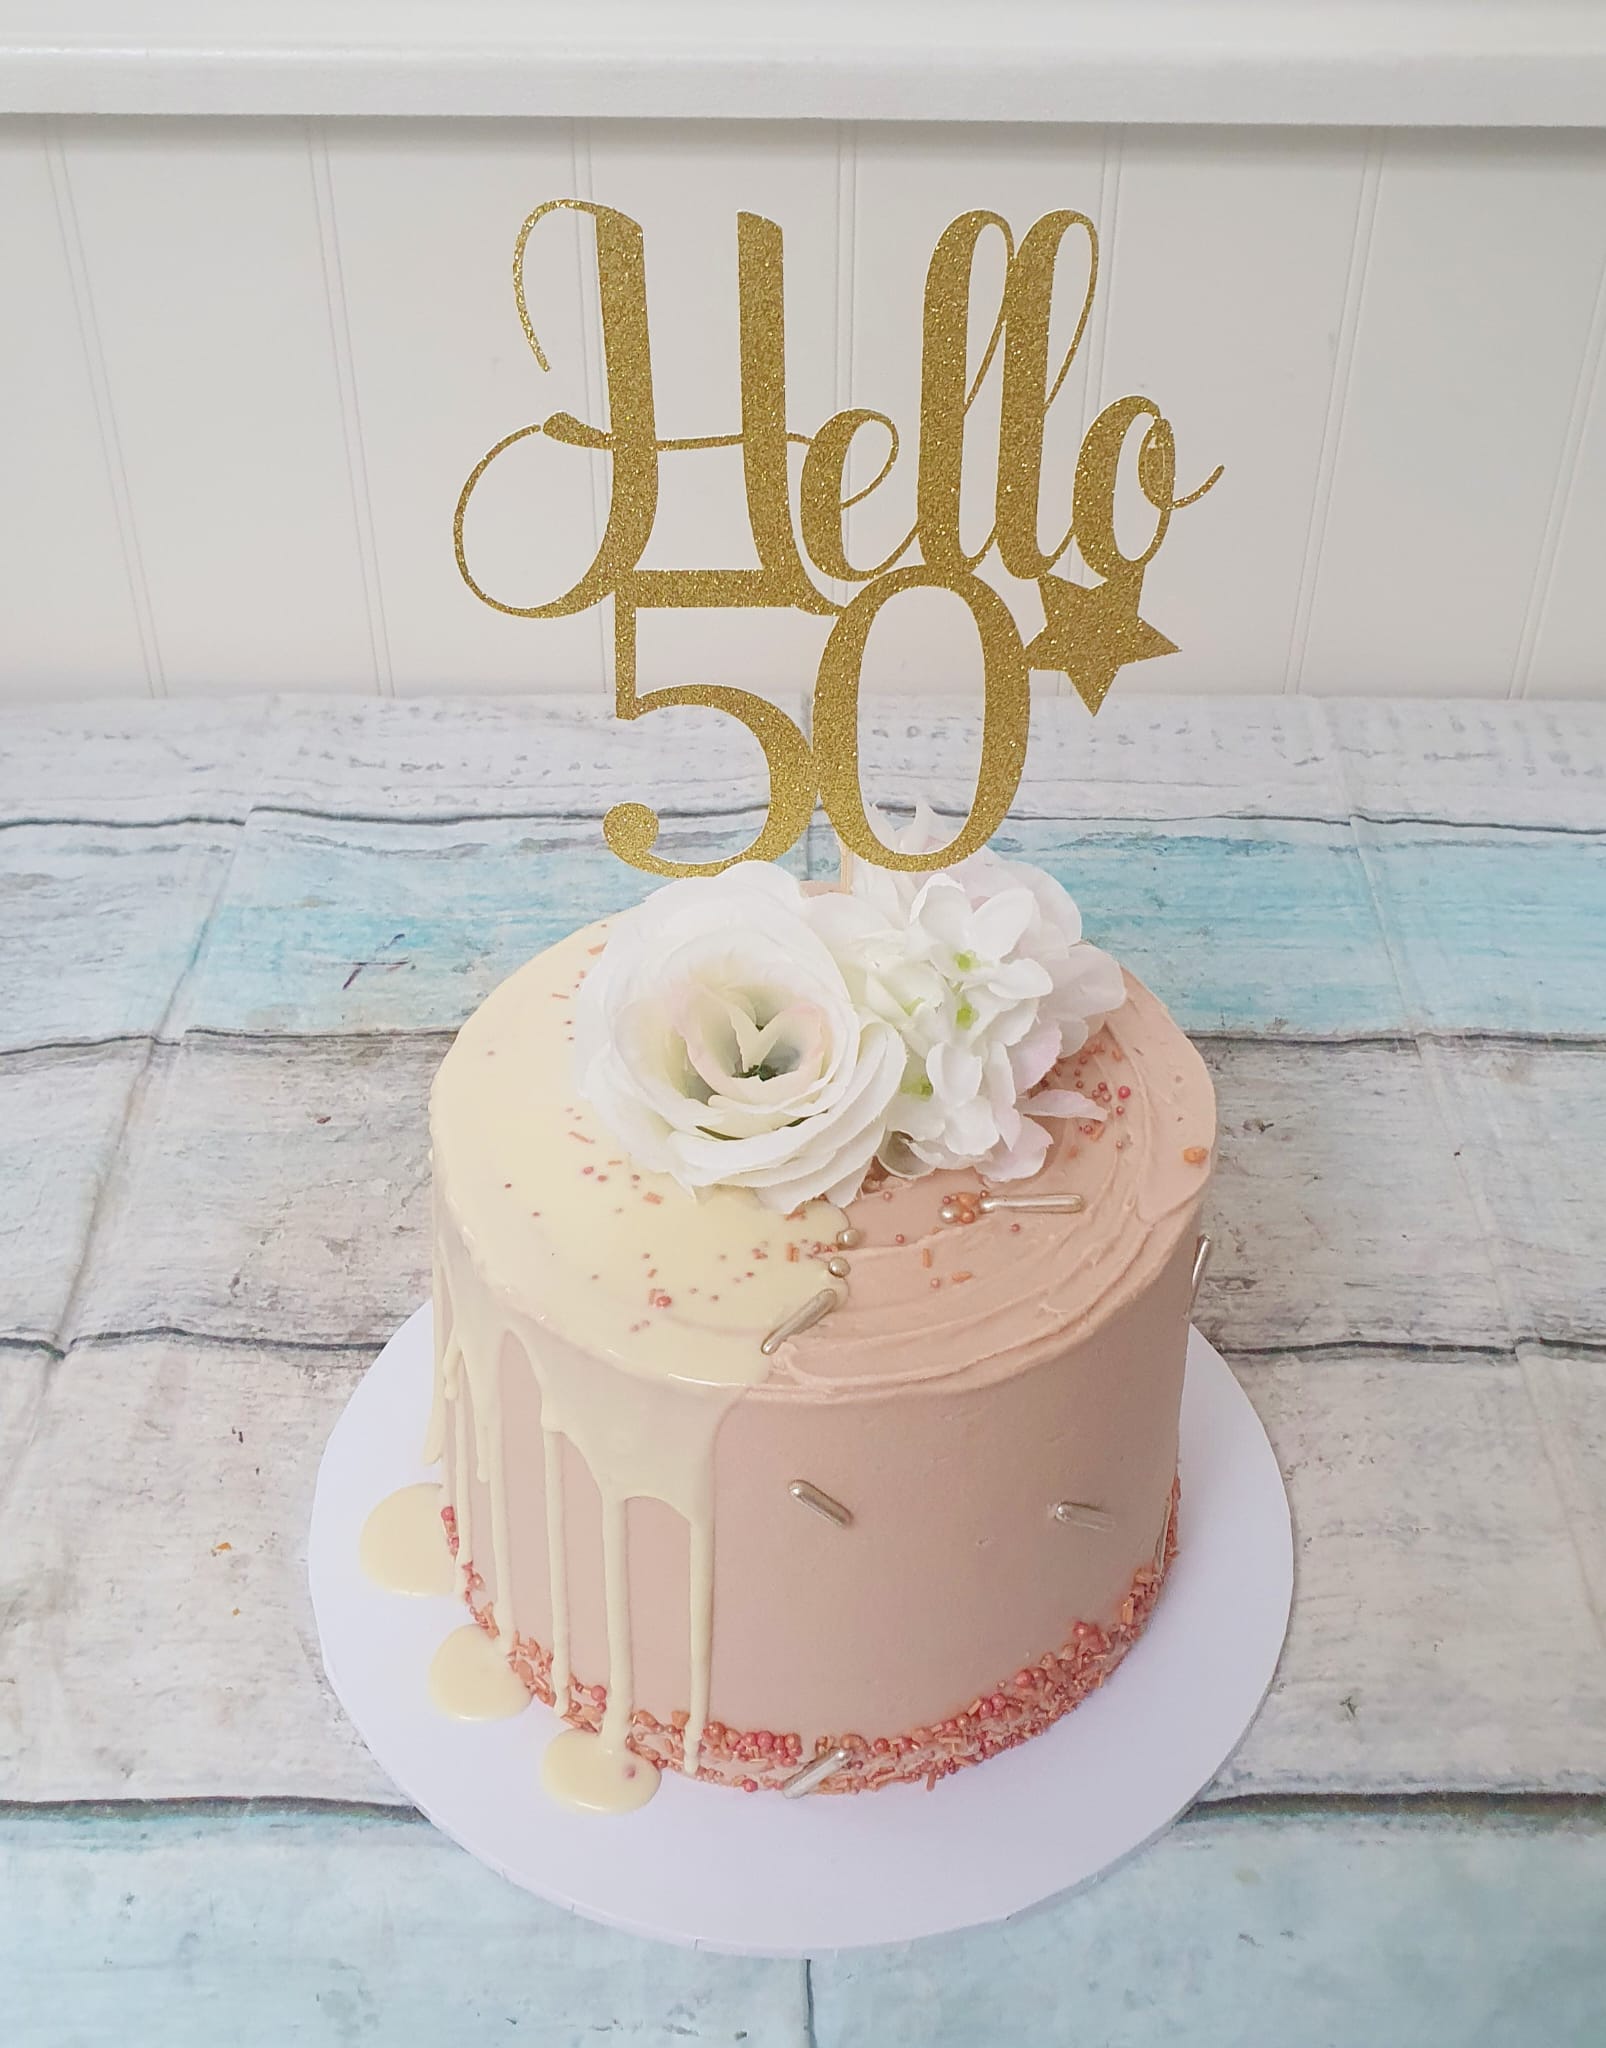 Cake Design Trends - The Sydney Edit | Butterfly birthday cakes, Pretty  birthday cakes, Elegant birthday cakes